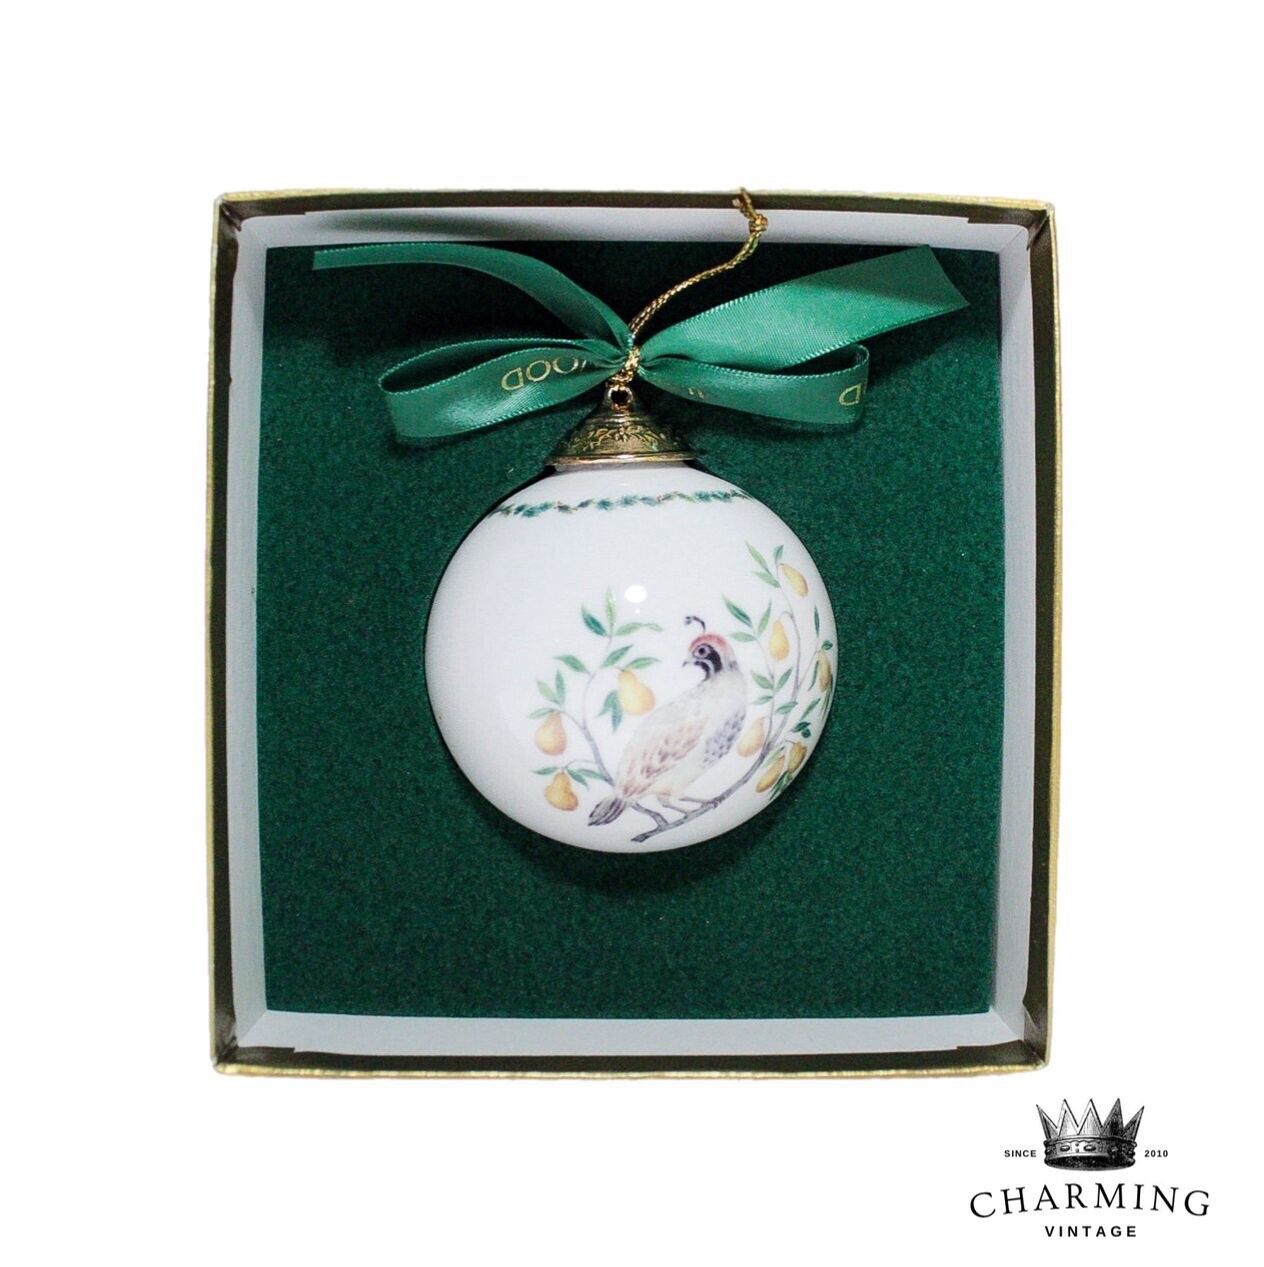 VTG Wedgwood 12 Days of Christmas Partridge in A Pear Tree Ornament w/Box